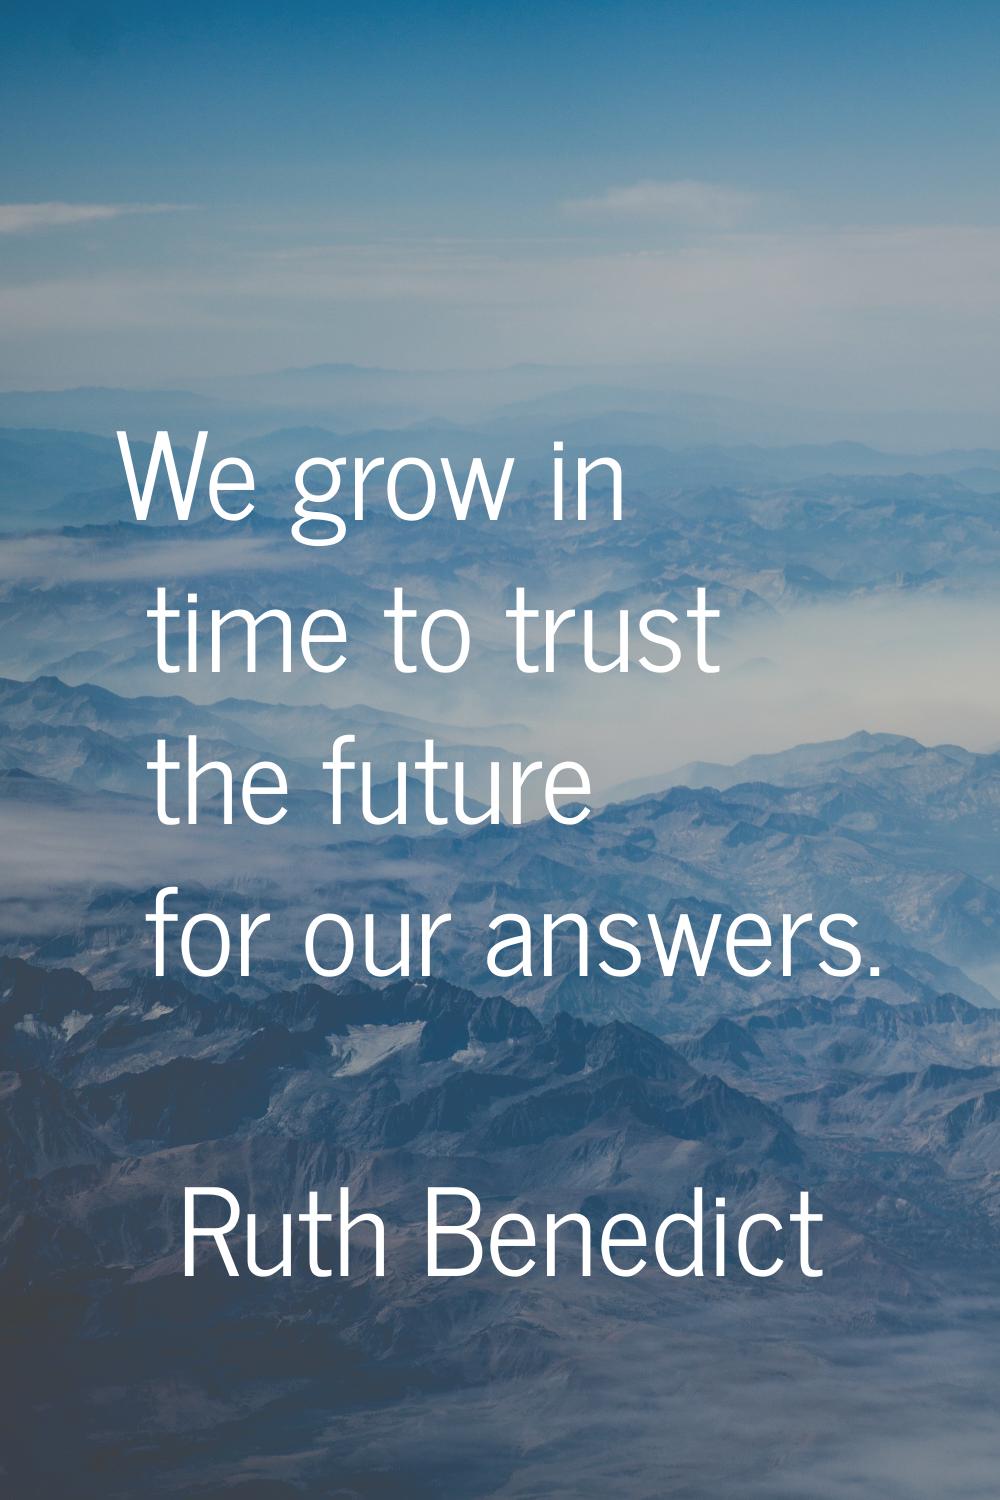 We grow in time to trust the future for our answers.